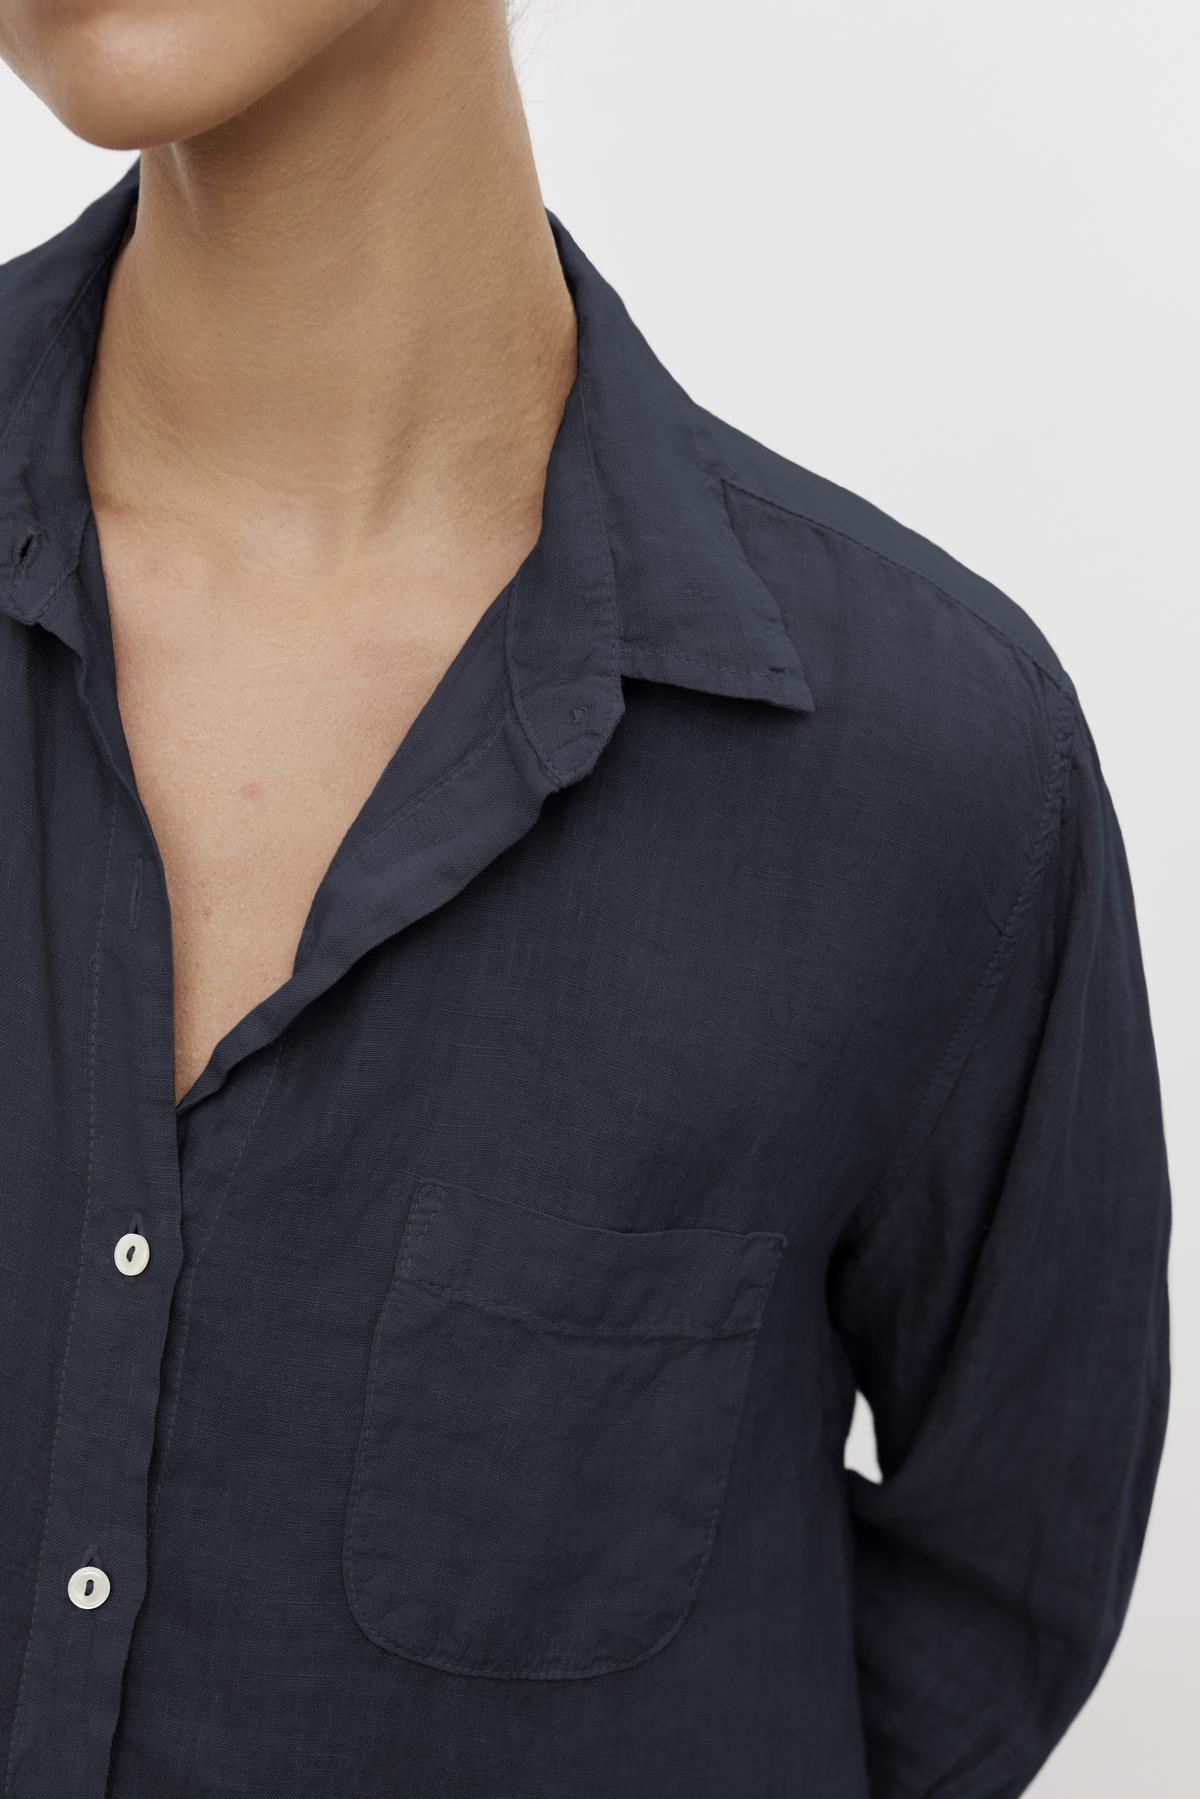 Close-up of a person wearing the MULHOLLAND LINEN SHIRT by Velvet by Jenny Graham, a dark blue linen button-up shirt with a left chest pocket. The shirt collar is slightly open, the sleeves are long, and it features a relaxed silhouette.-36592968532161